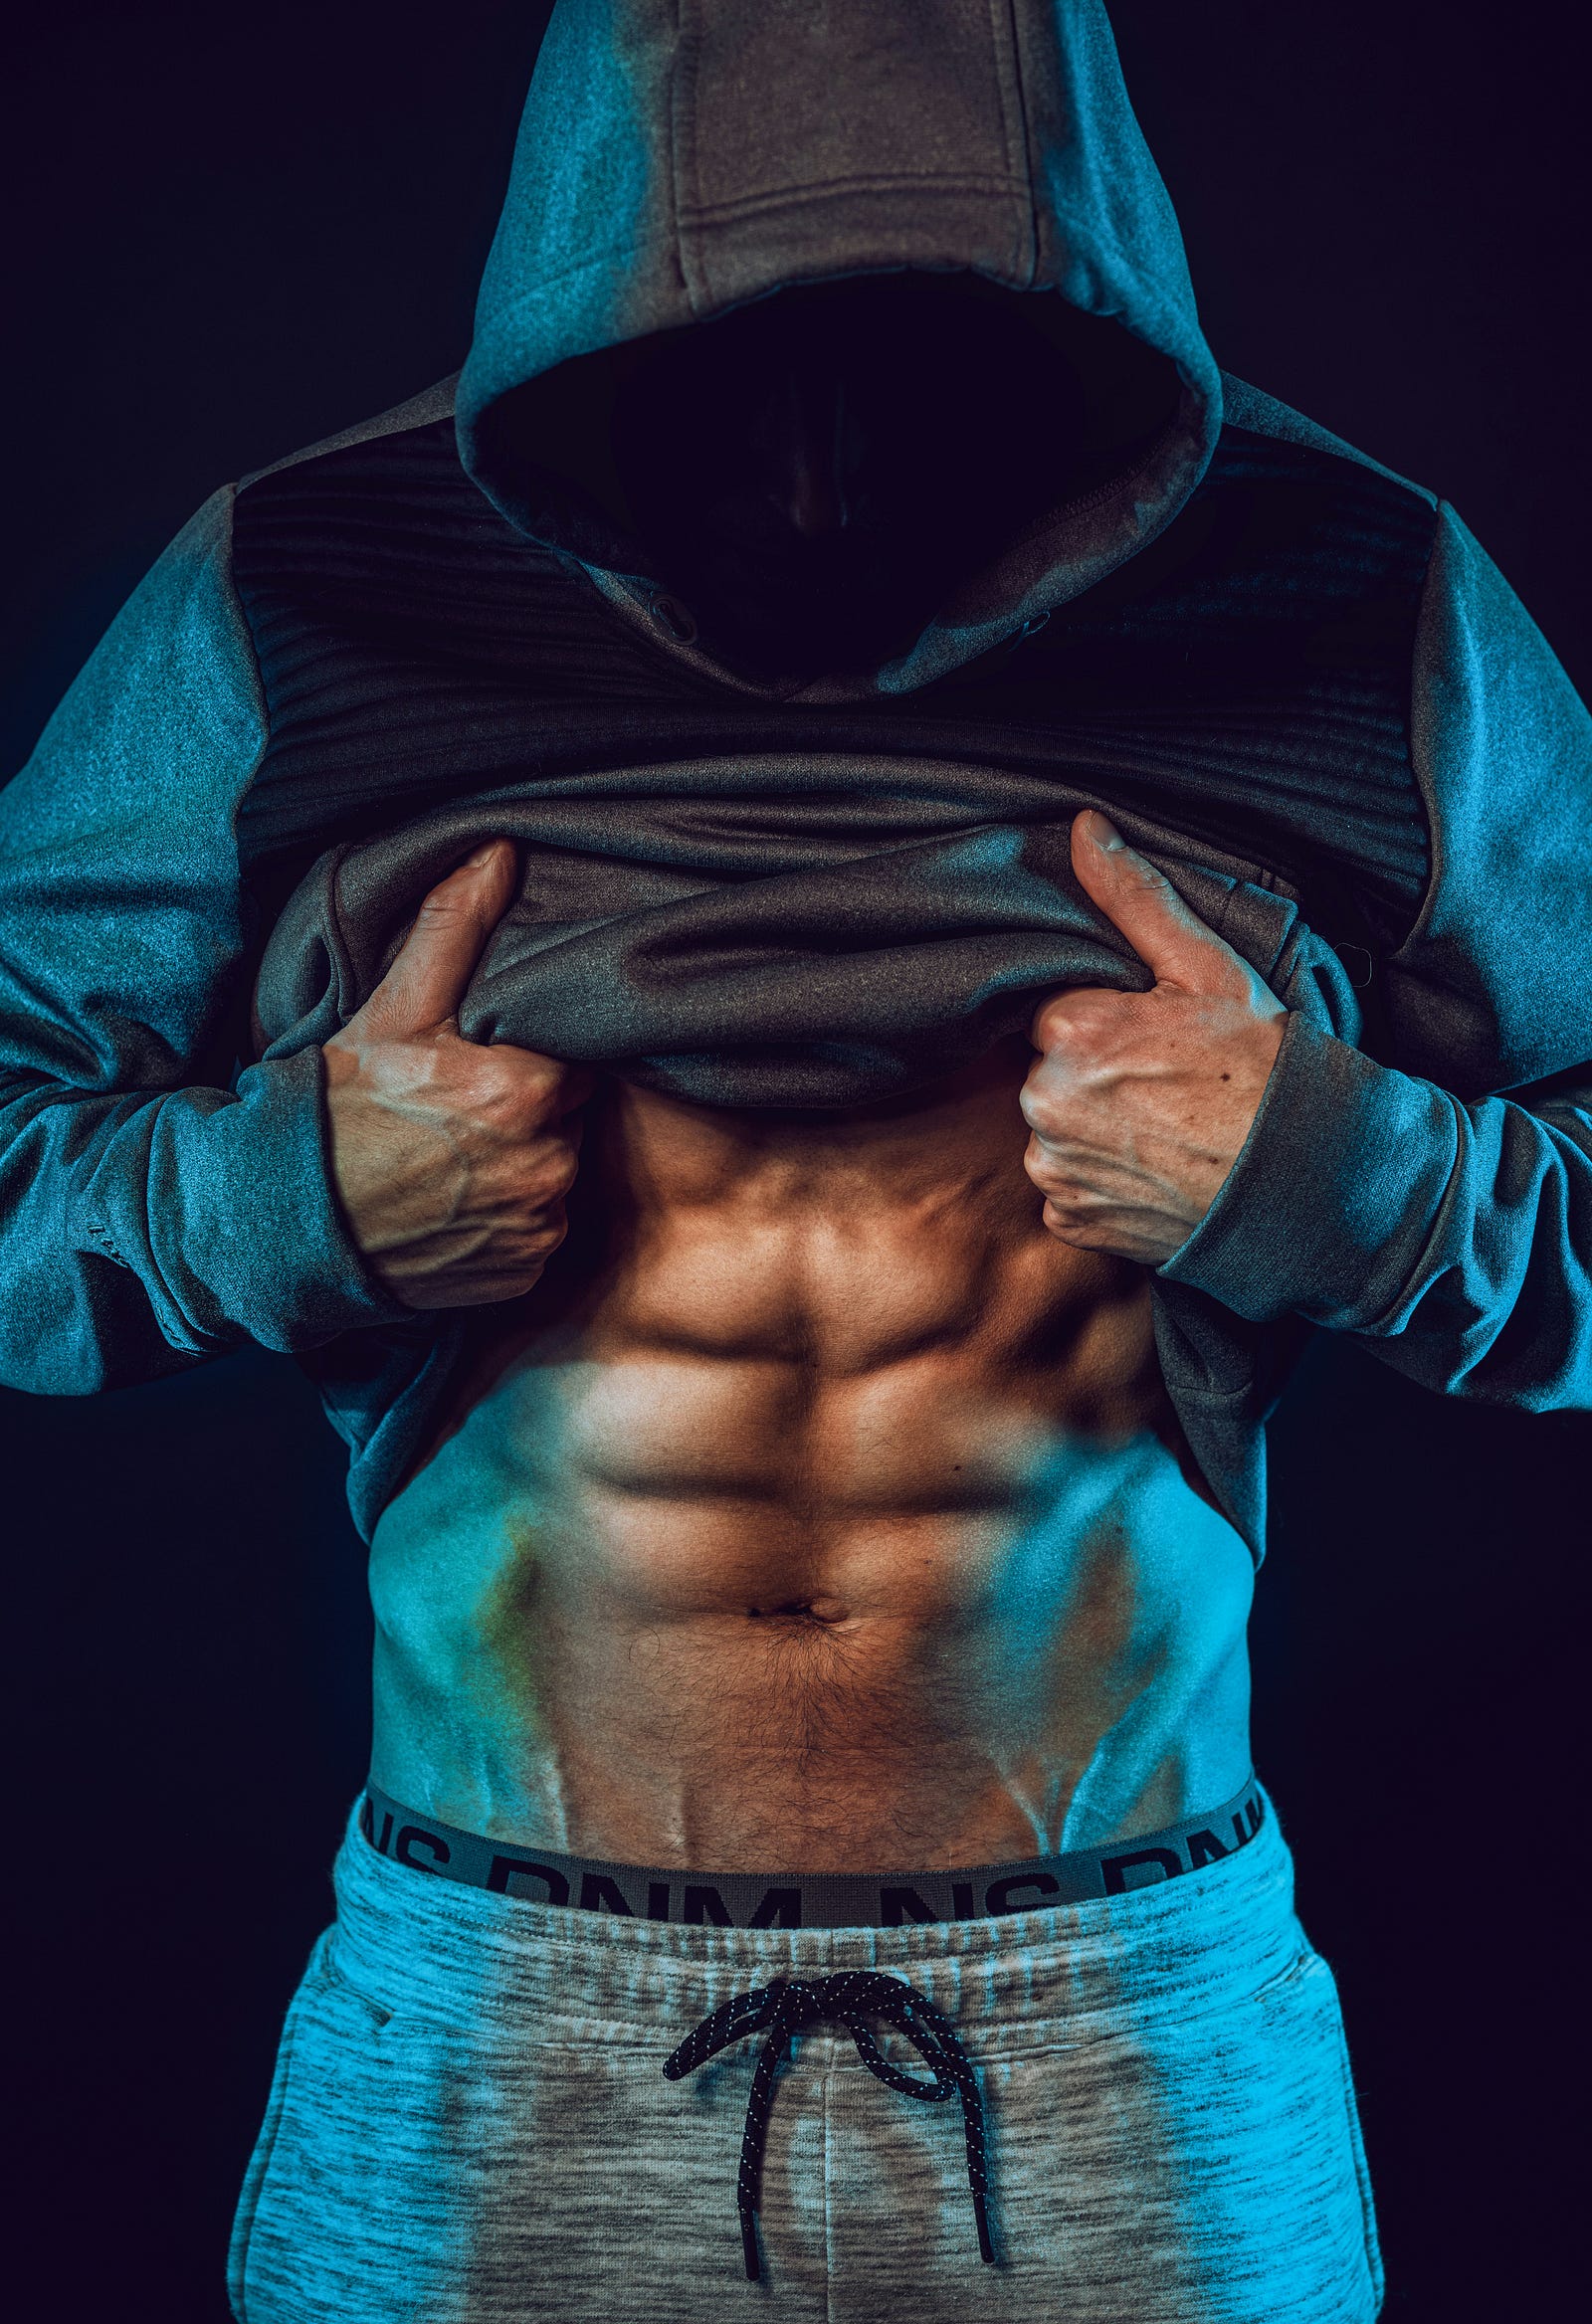 A man has six pack abs. Ab stimulators offer a promise that is too good to be true: toned abs and a trim waistline without additional work.